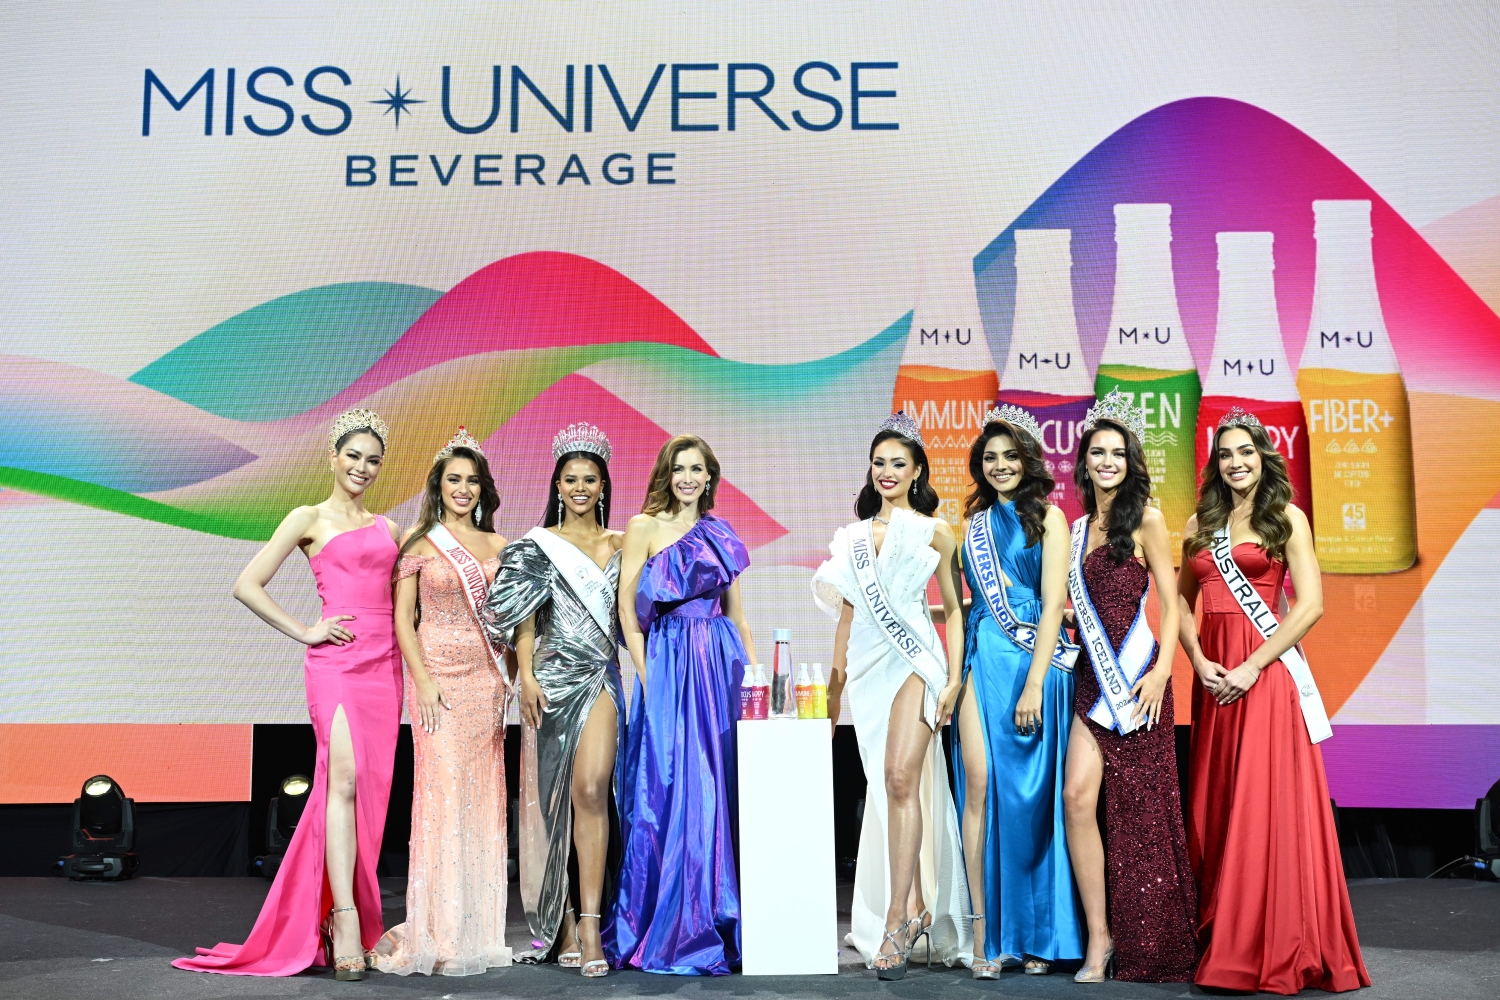 Miss Universe Delegates from 8 countries joined the launching event